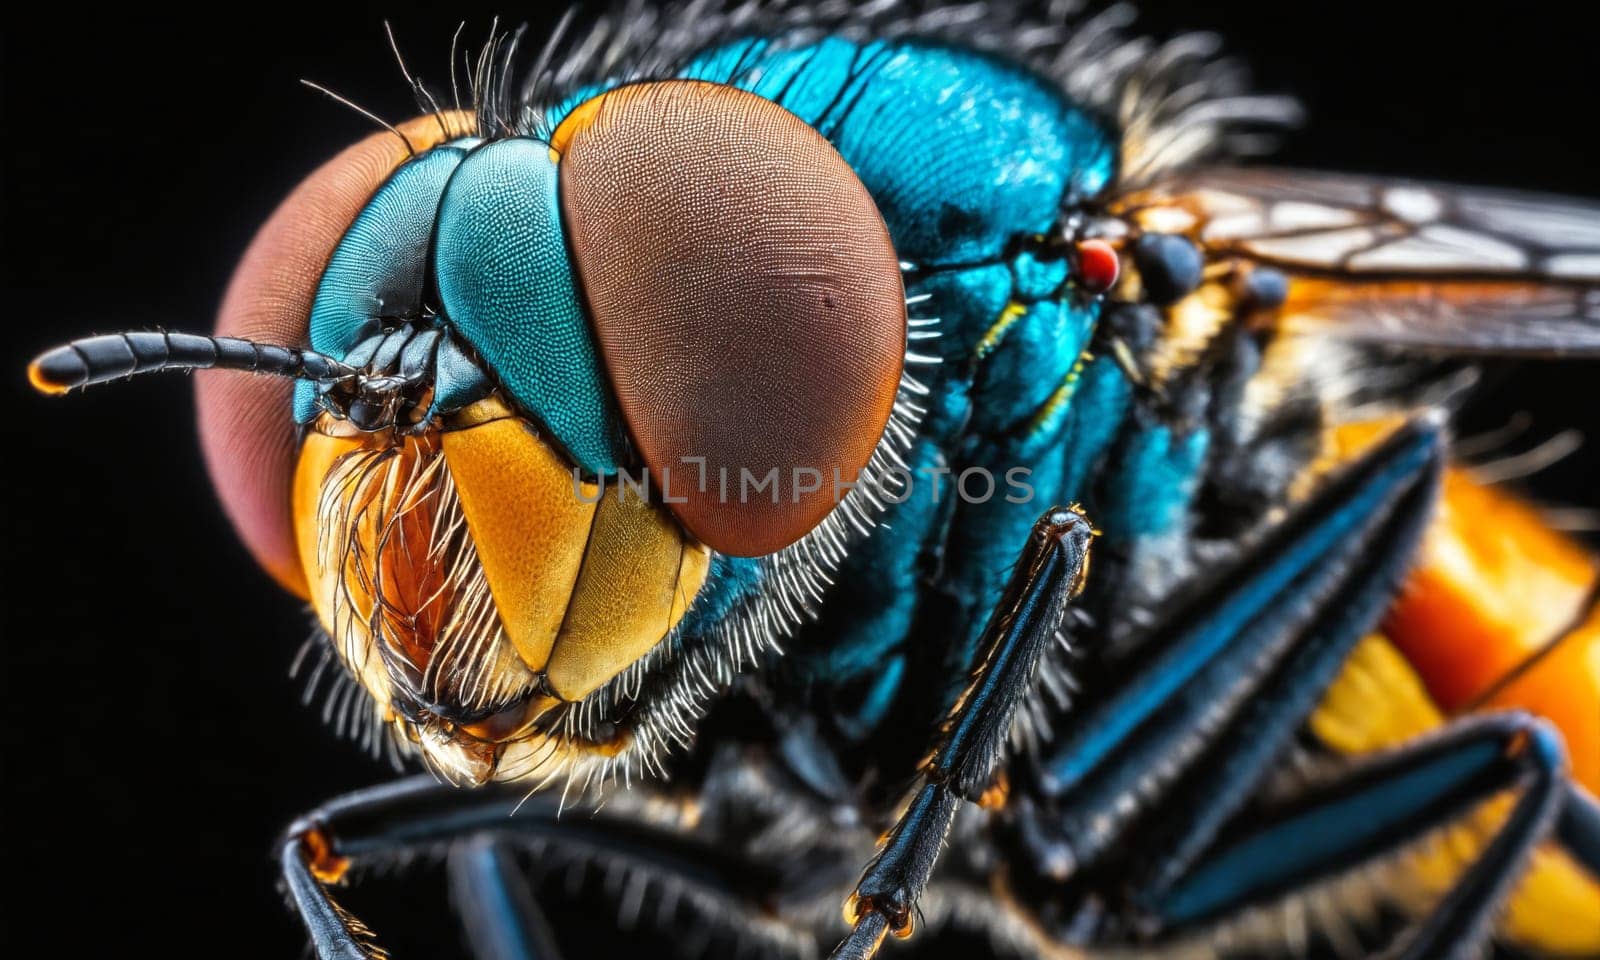 A closeup macro photograph of a house fly, an arthropod insect organism with wings. This invertebrate is a pollinator but can also be considered a pest on a black background